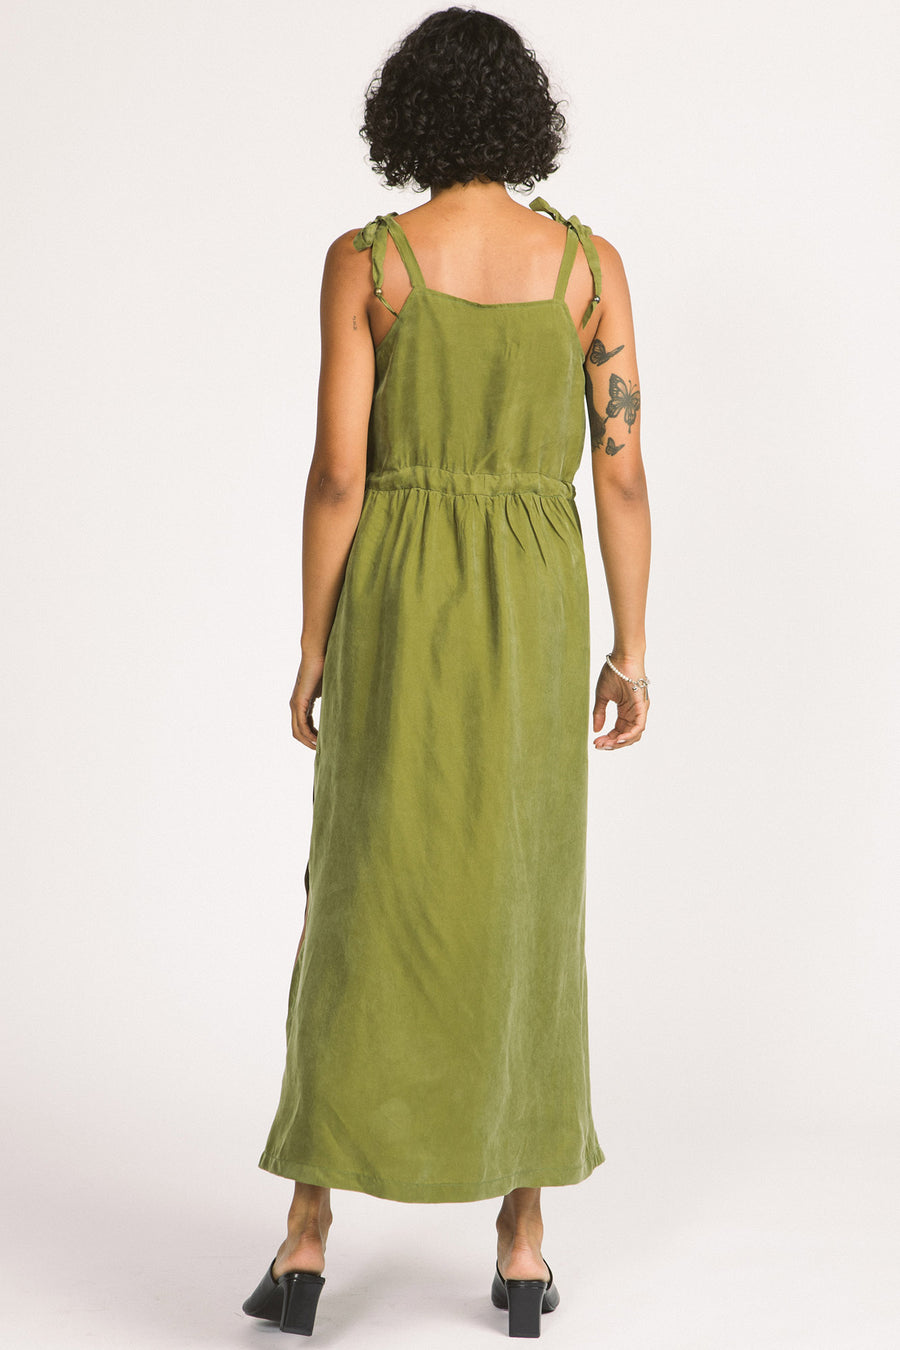 Back view of woman wearing moss green Novalie dress by Allison Wonderland with adjustable shoulder straps and waist. 